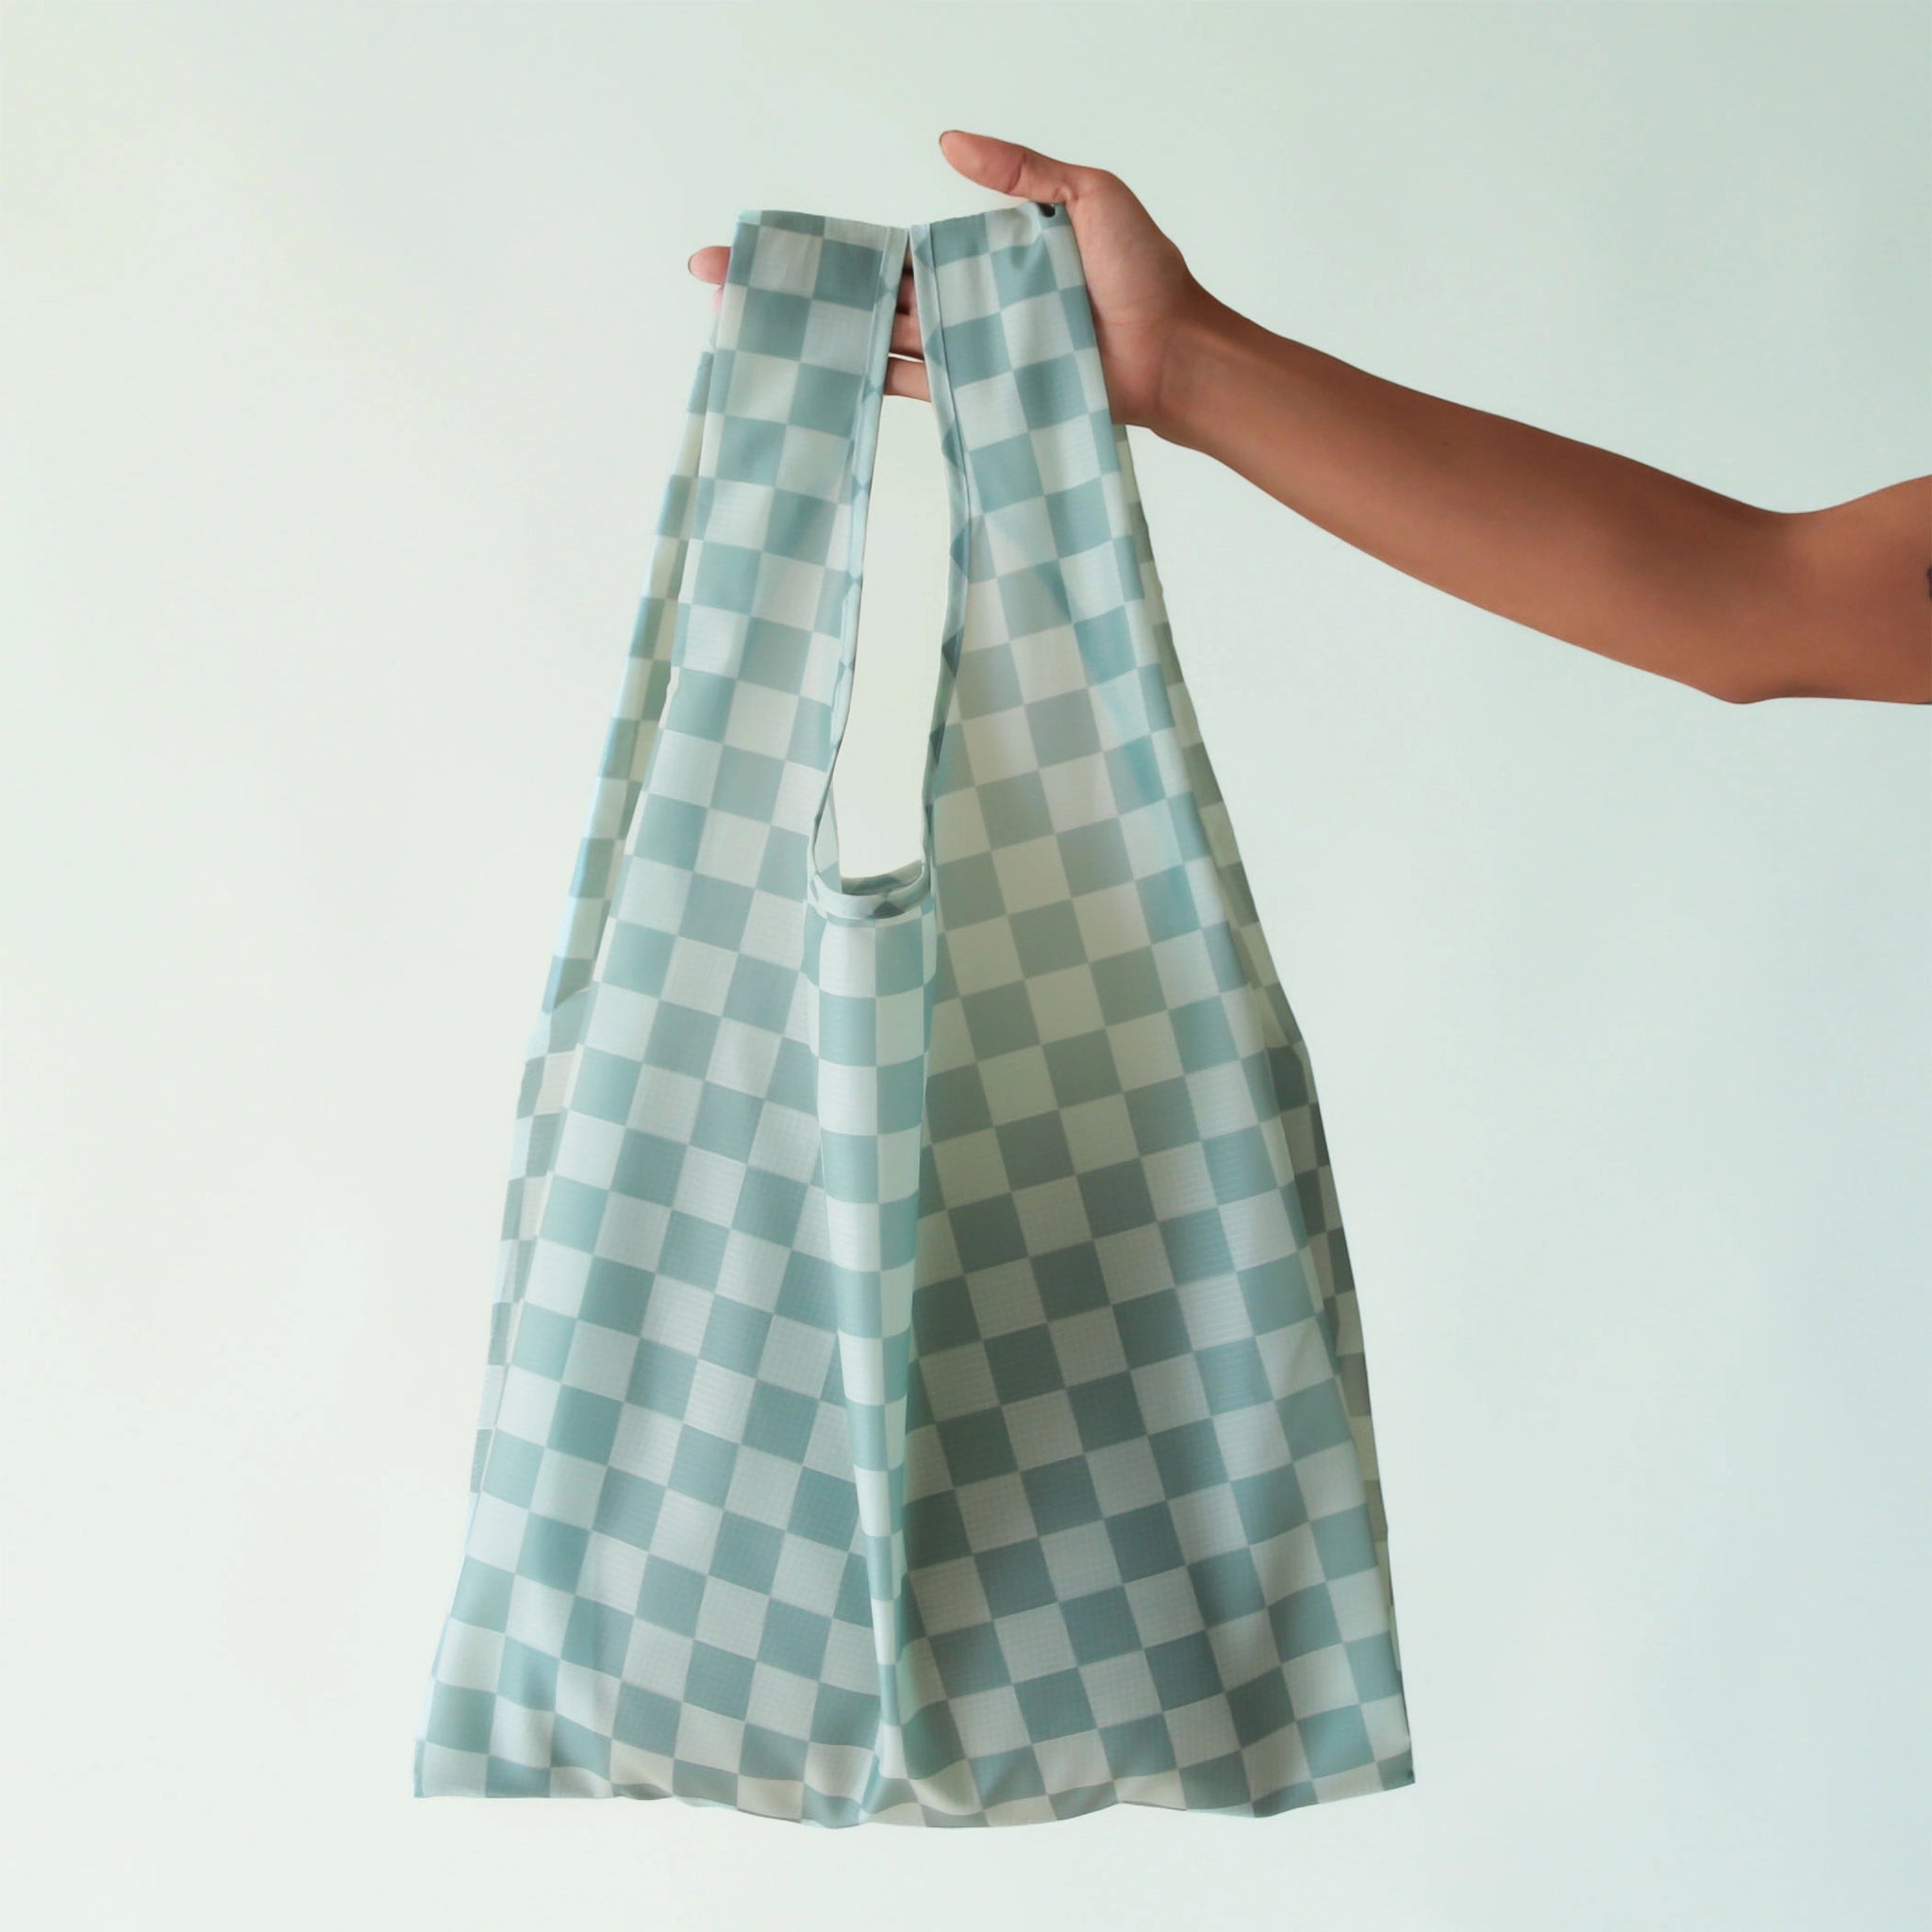 On a light blue background is a turquoise and light blue checkered print nylon bag.